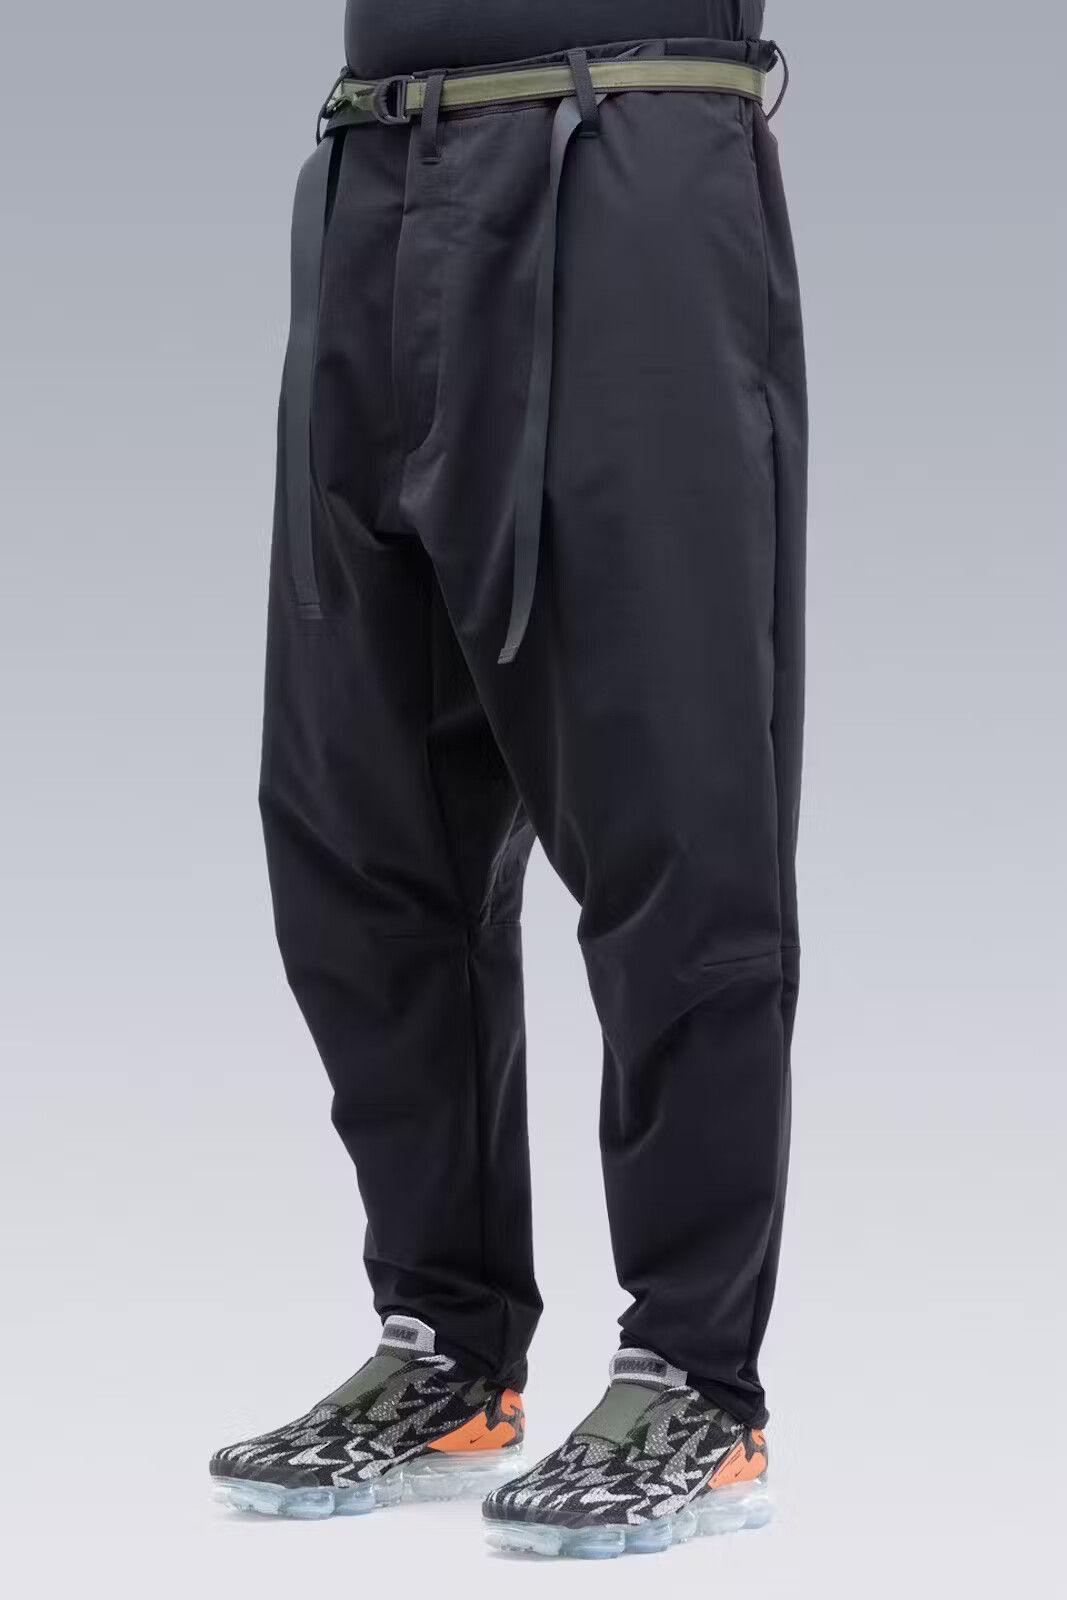 Acronym P31-DS - SS19 | Grailed